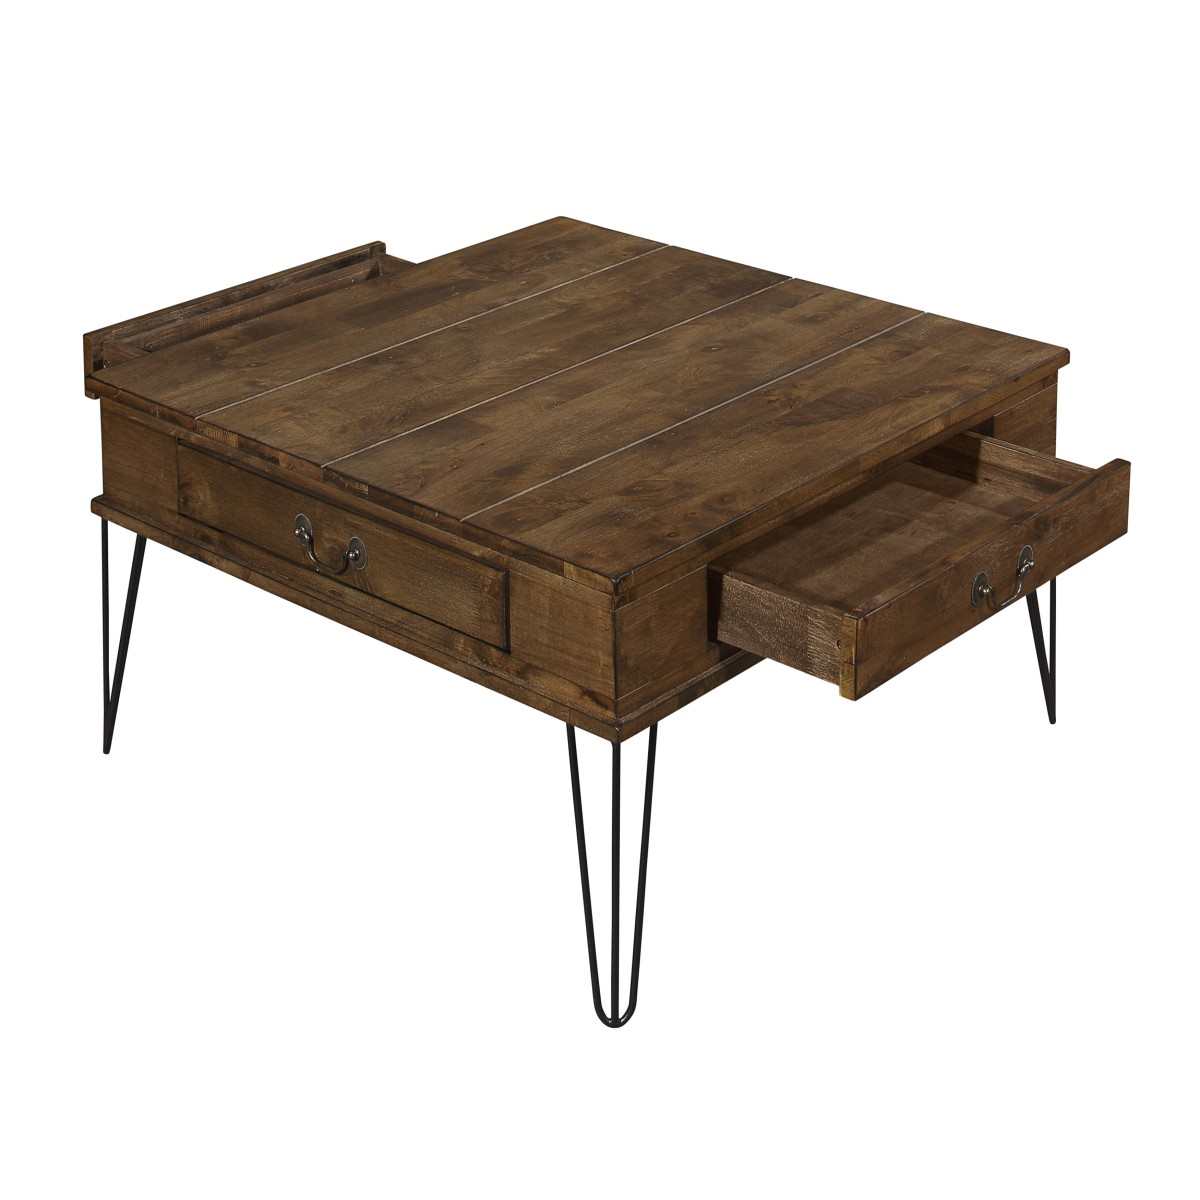 Shaffner Square Coffee Table Collection 3670M